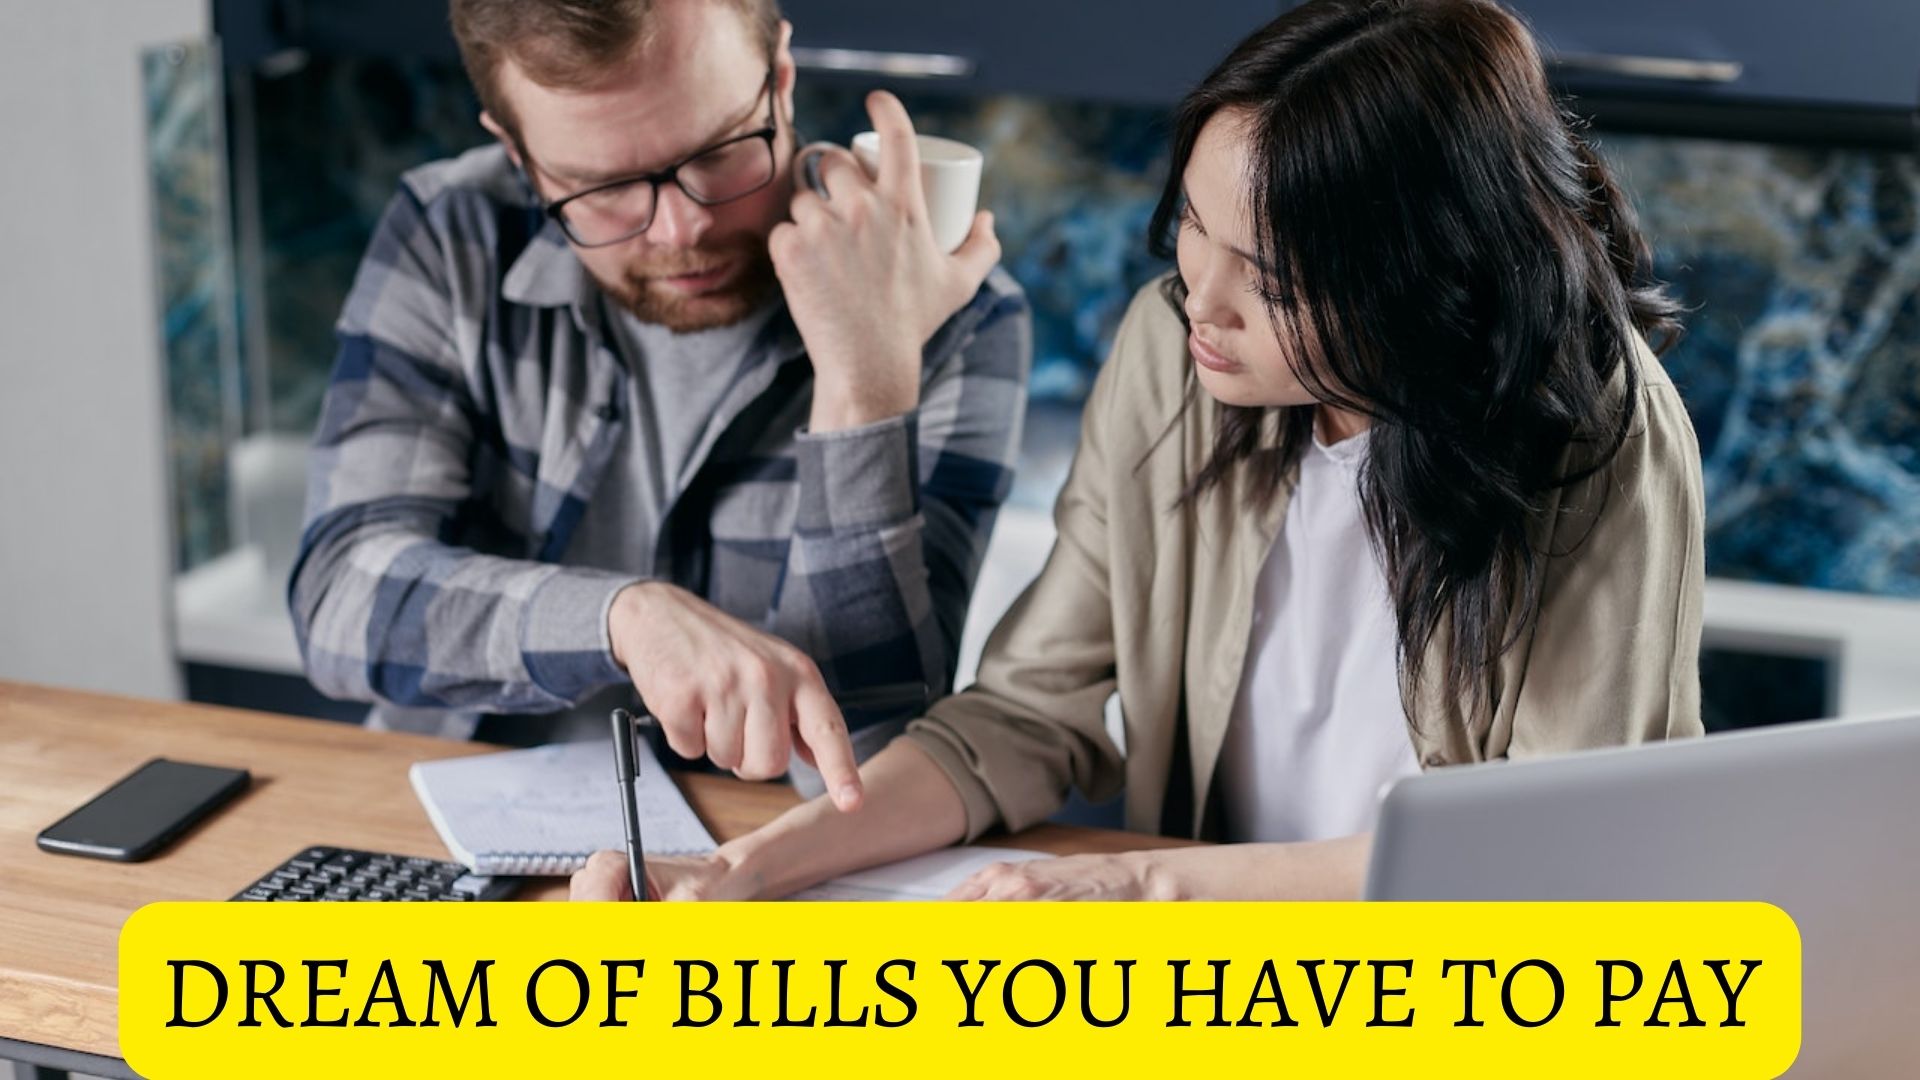 Dream Of Bills You Have To Pay - It Symbolizes A Financial Crisis